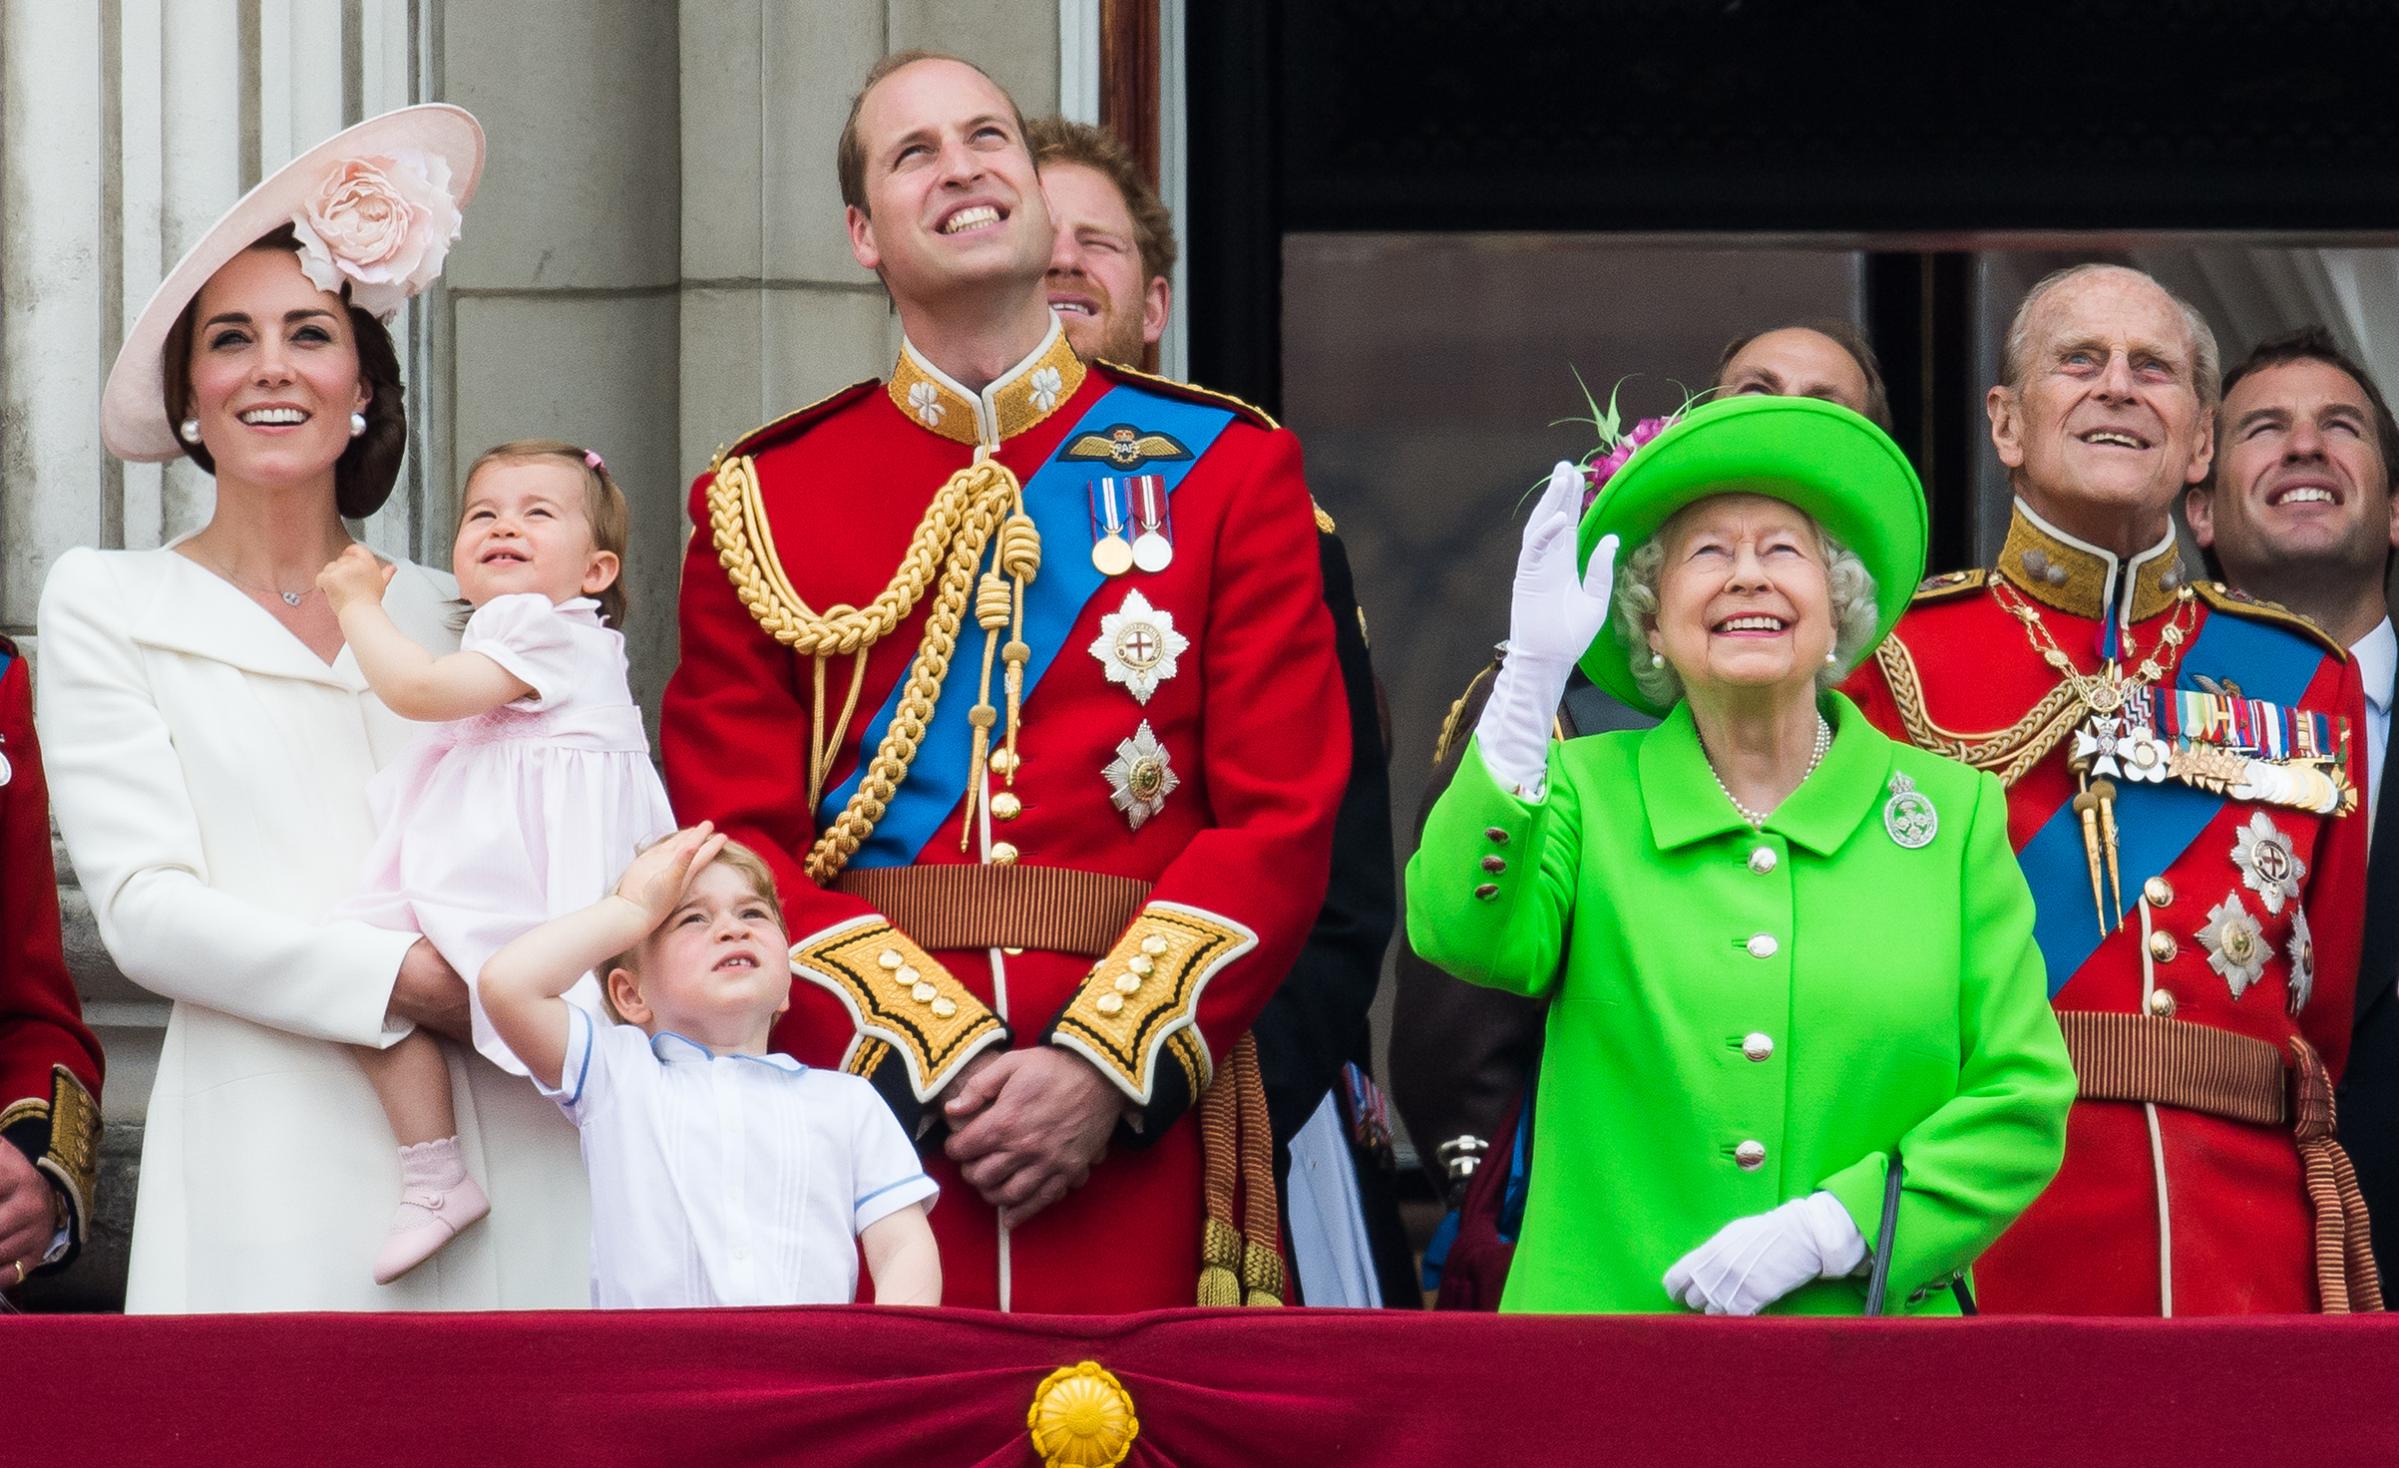 Catherine, Duchess of Cambridge, Princess Charlotte, Prince George, Prince William, Duke of Cambridge, Queen Elizabeth II and Prince Philip, Duke of Edinburgh, stand on the balcony during the Trooping the Colour, this year marking the Queen's official 90th birthday at The Mall in London on June 11, 2016 in London, England. The ceremony is the Queen's annual birthday parade.